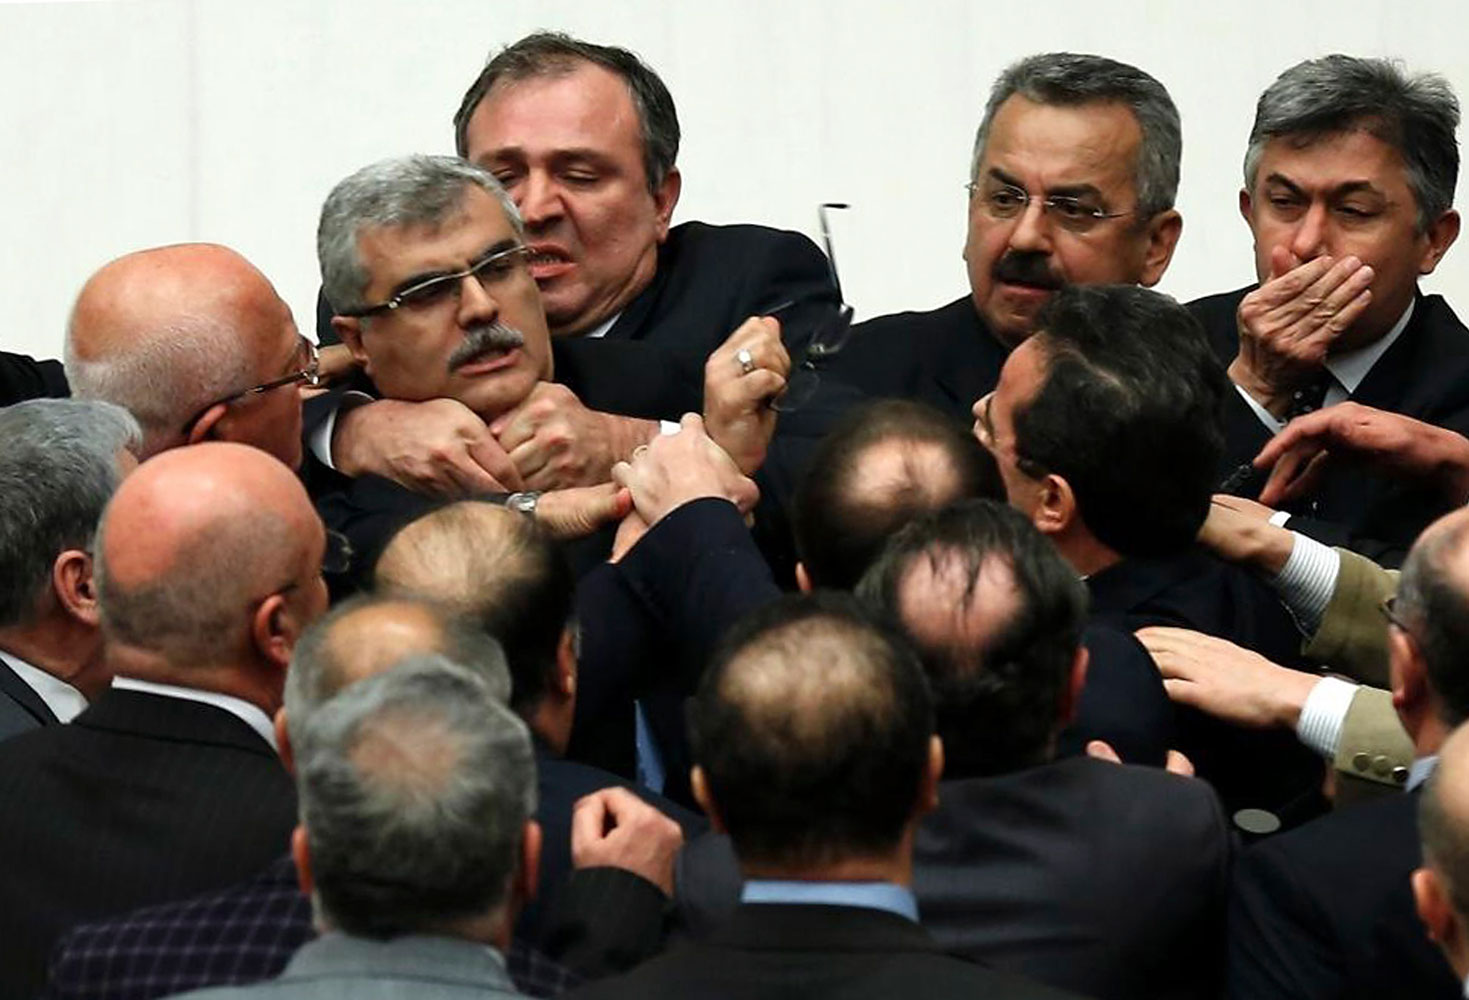 Turkish legislators from Prime Minister Recep Tayyip Erdogan's ruling party and the main opposition Republican People's Party brawl during a tense all-night debate over a controversial law on changes to a council that appoints and overseas judges and prosecutors, in Ankara, early Saturday, Feb. 15, 2014.